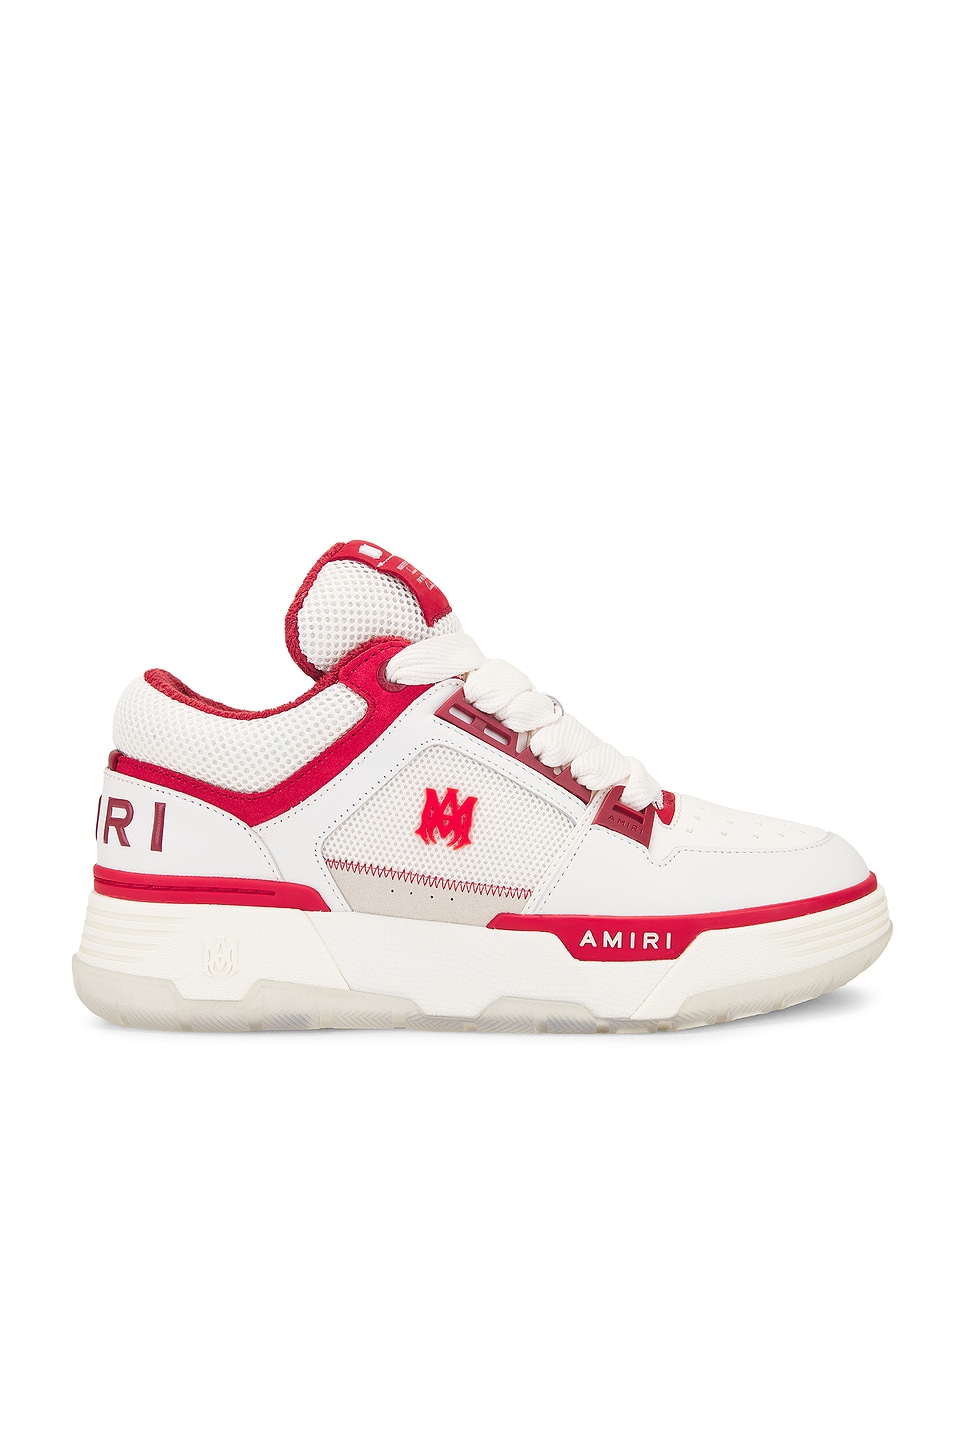 Image 1 of Amiri MA-1 in Red & White